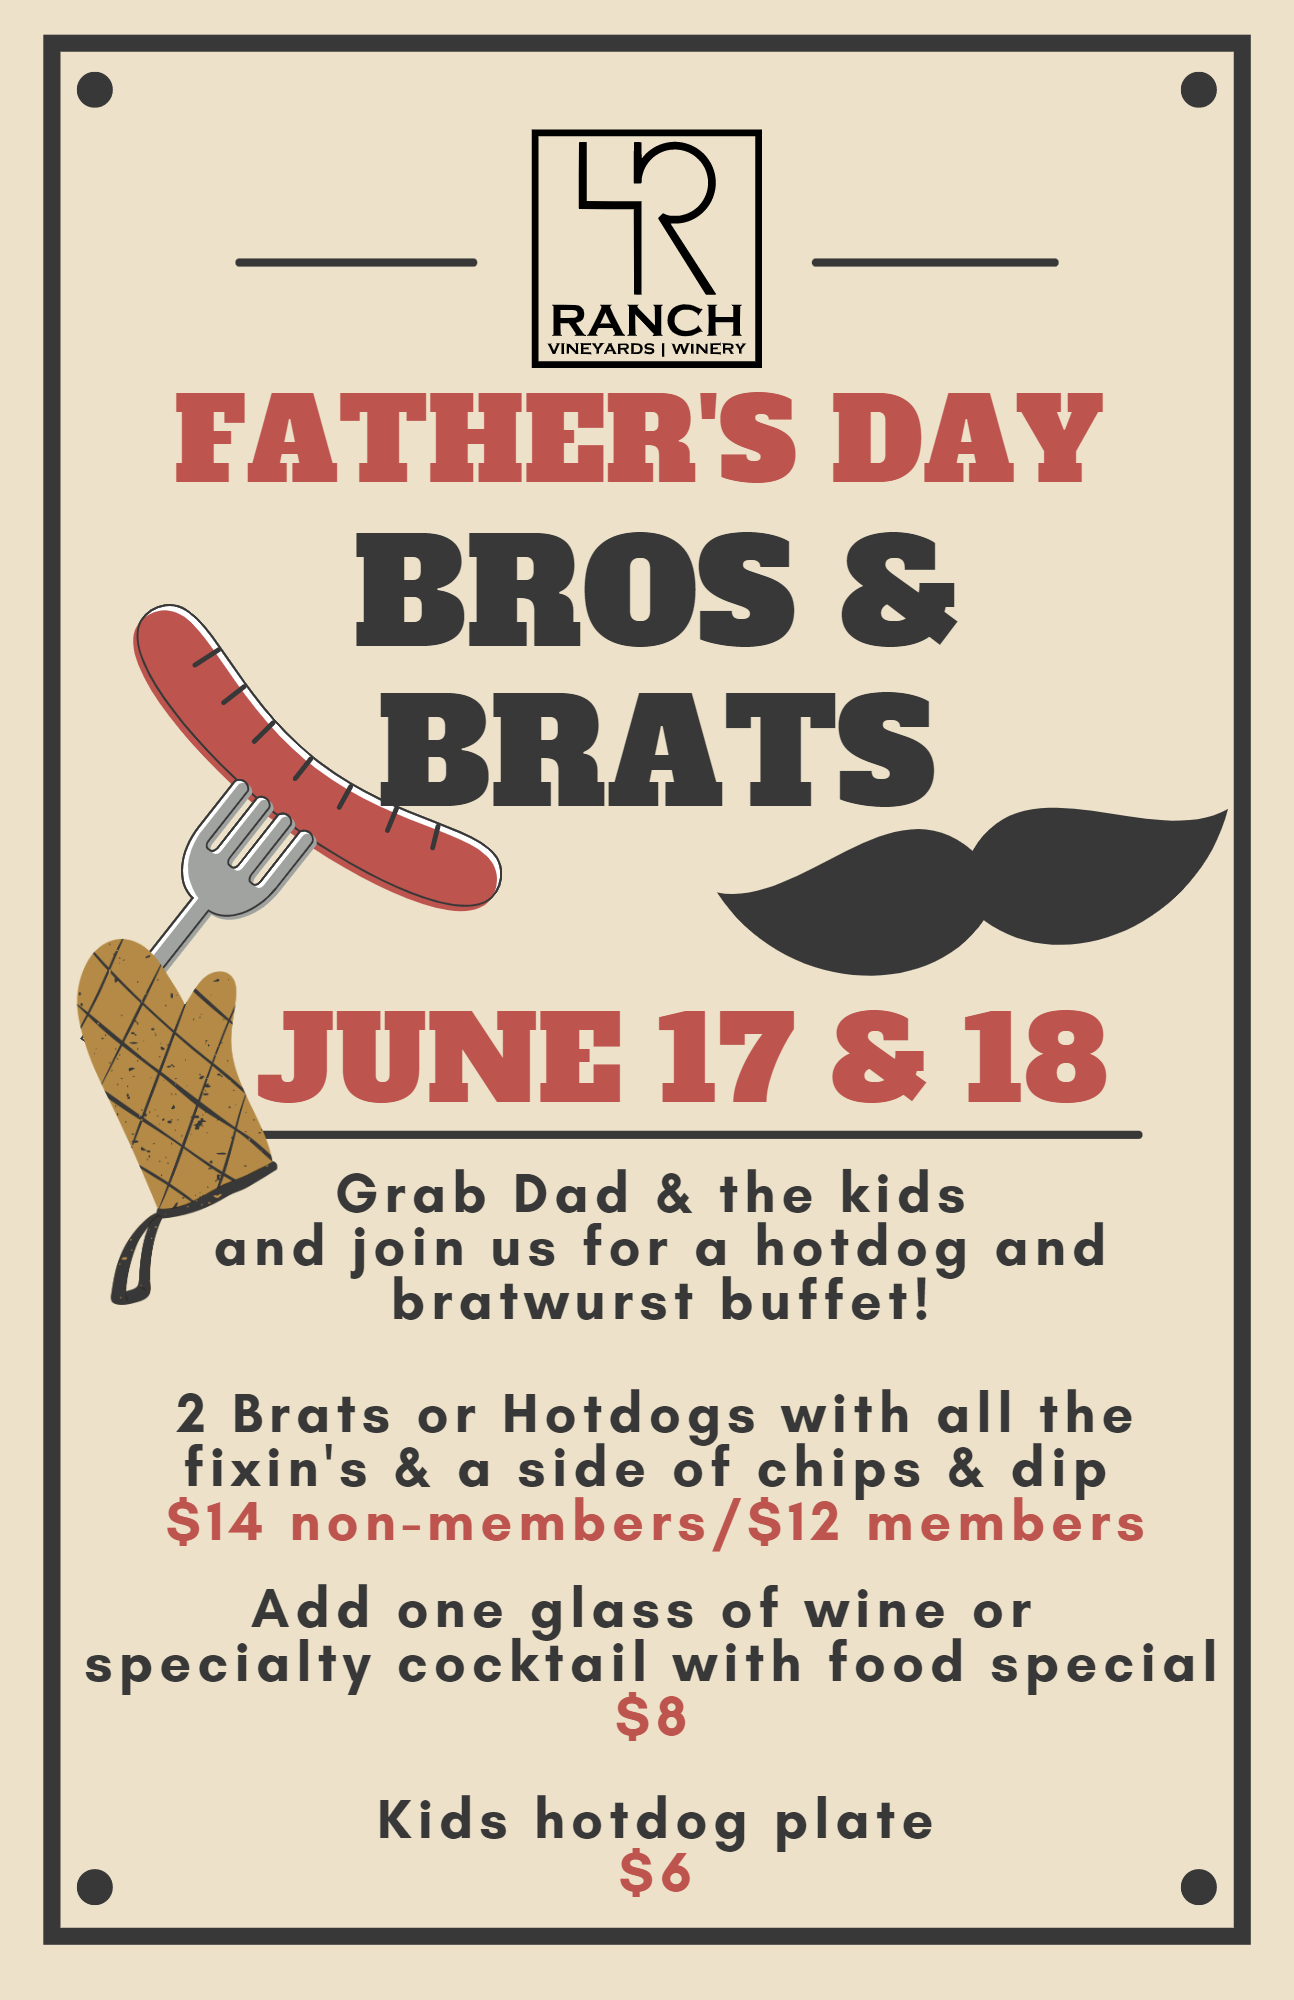 Father's Day, Brats & Bros celebration at 4R, Saturday, June 17 & Sunday, June 18